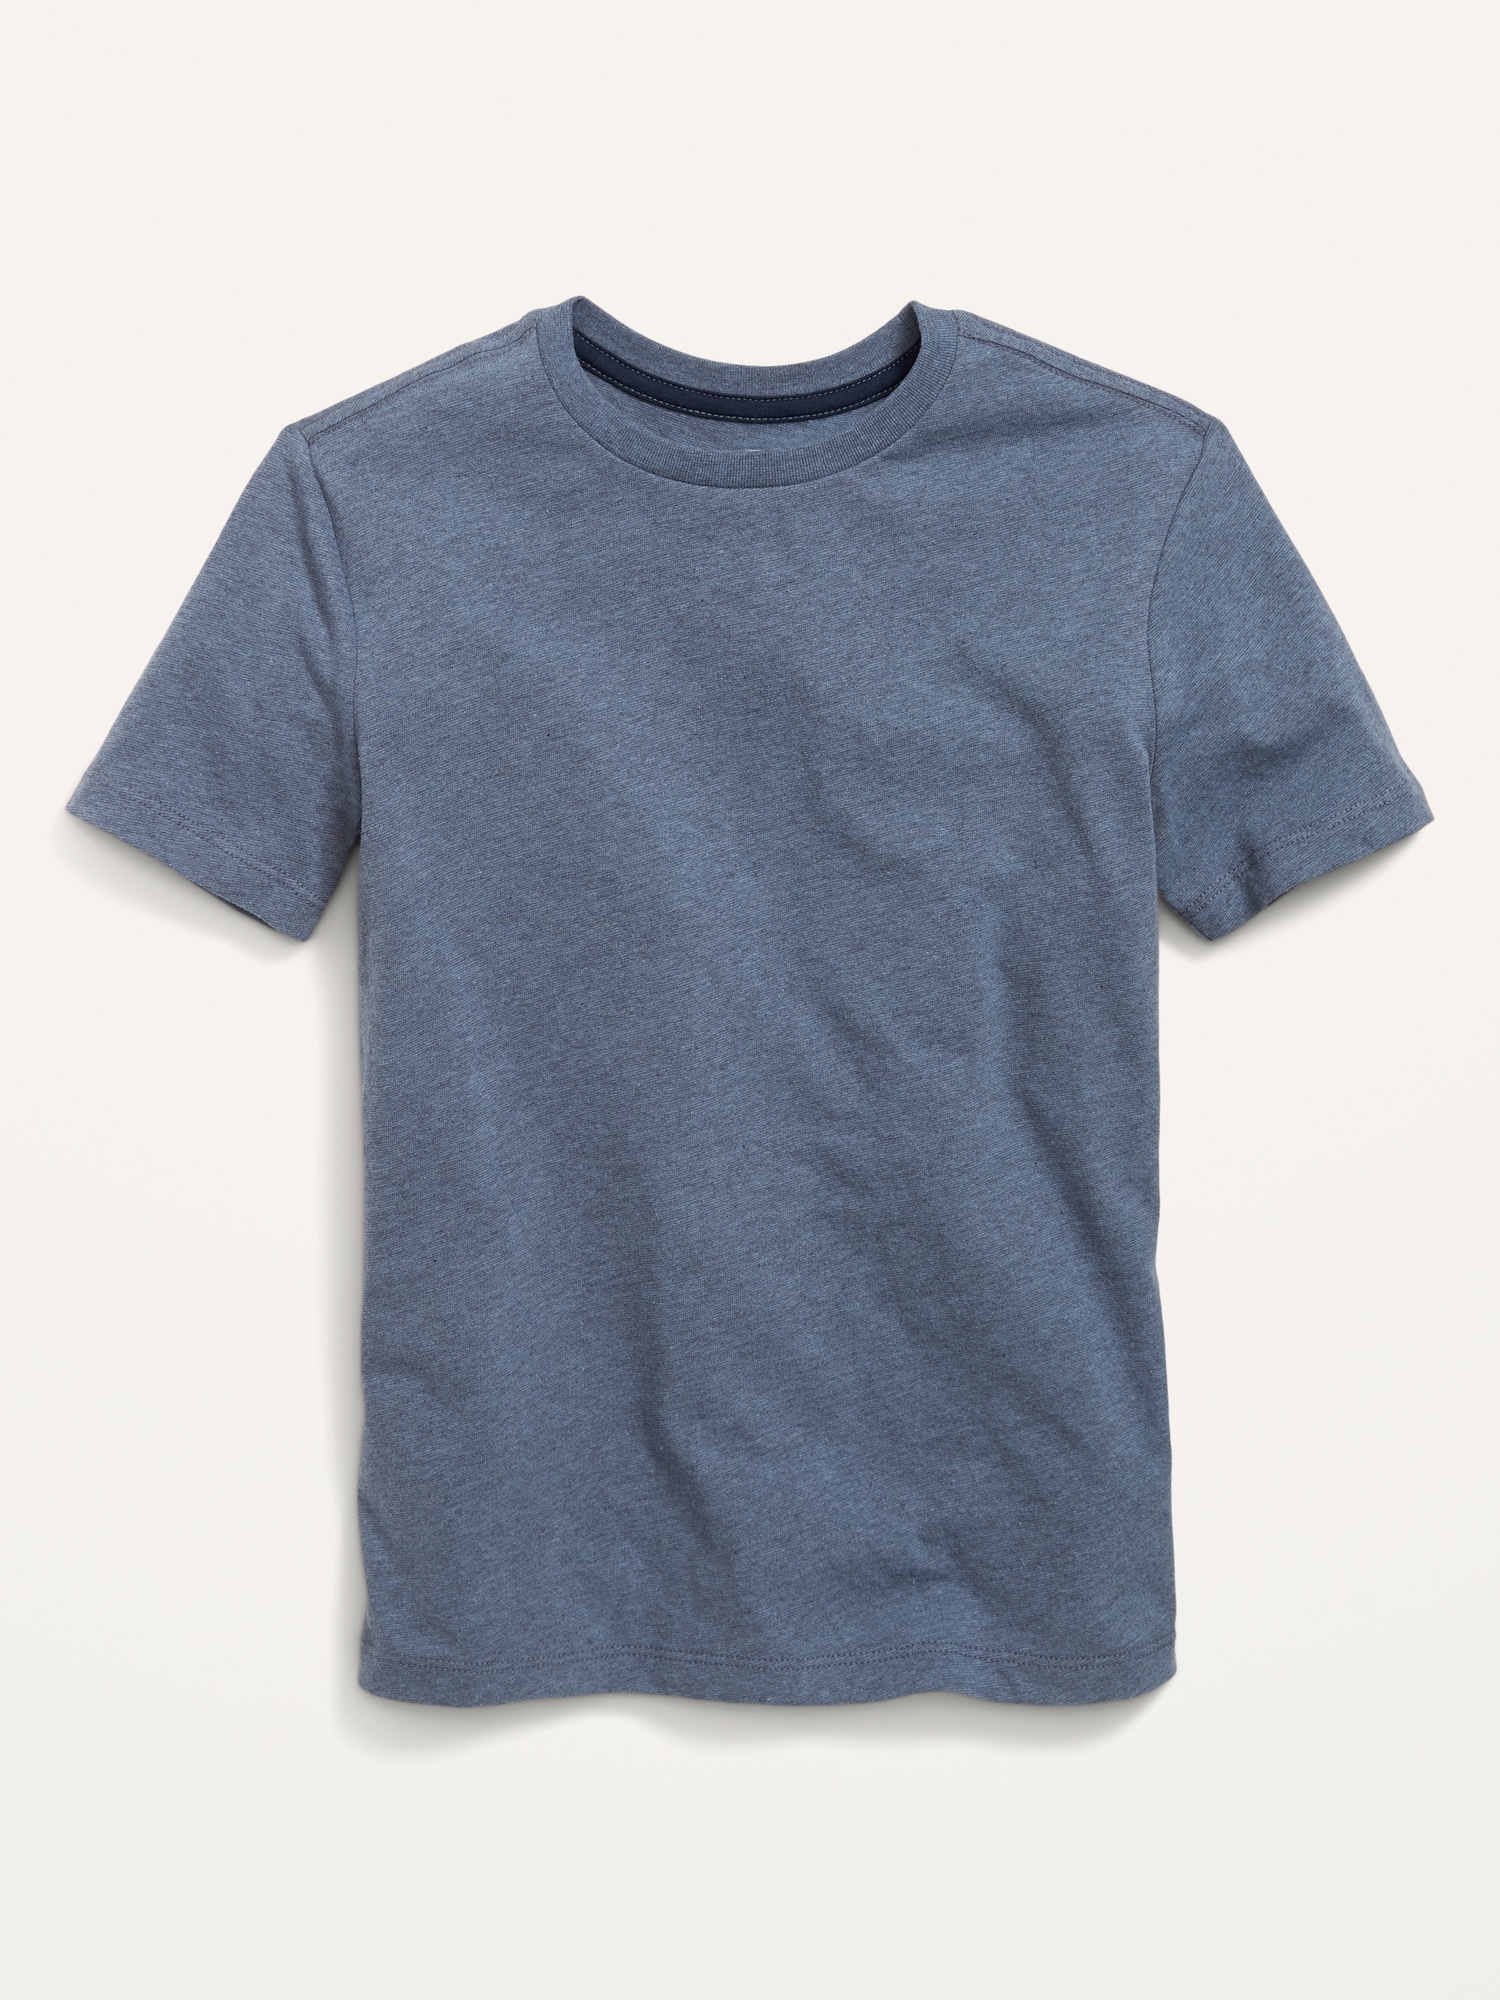 Softest Crew-Neck Tee for Boys | Old Navy